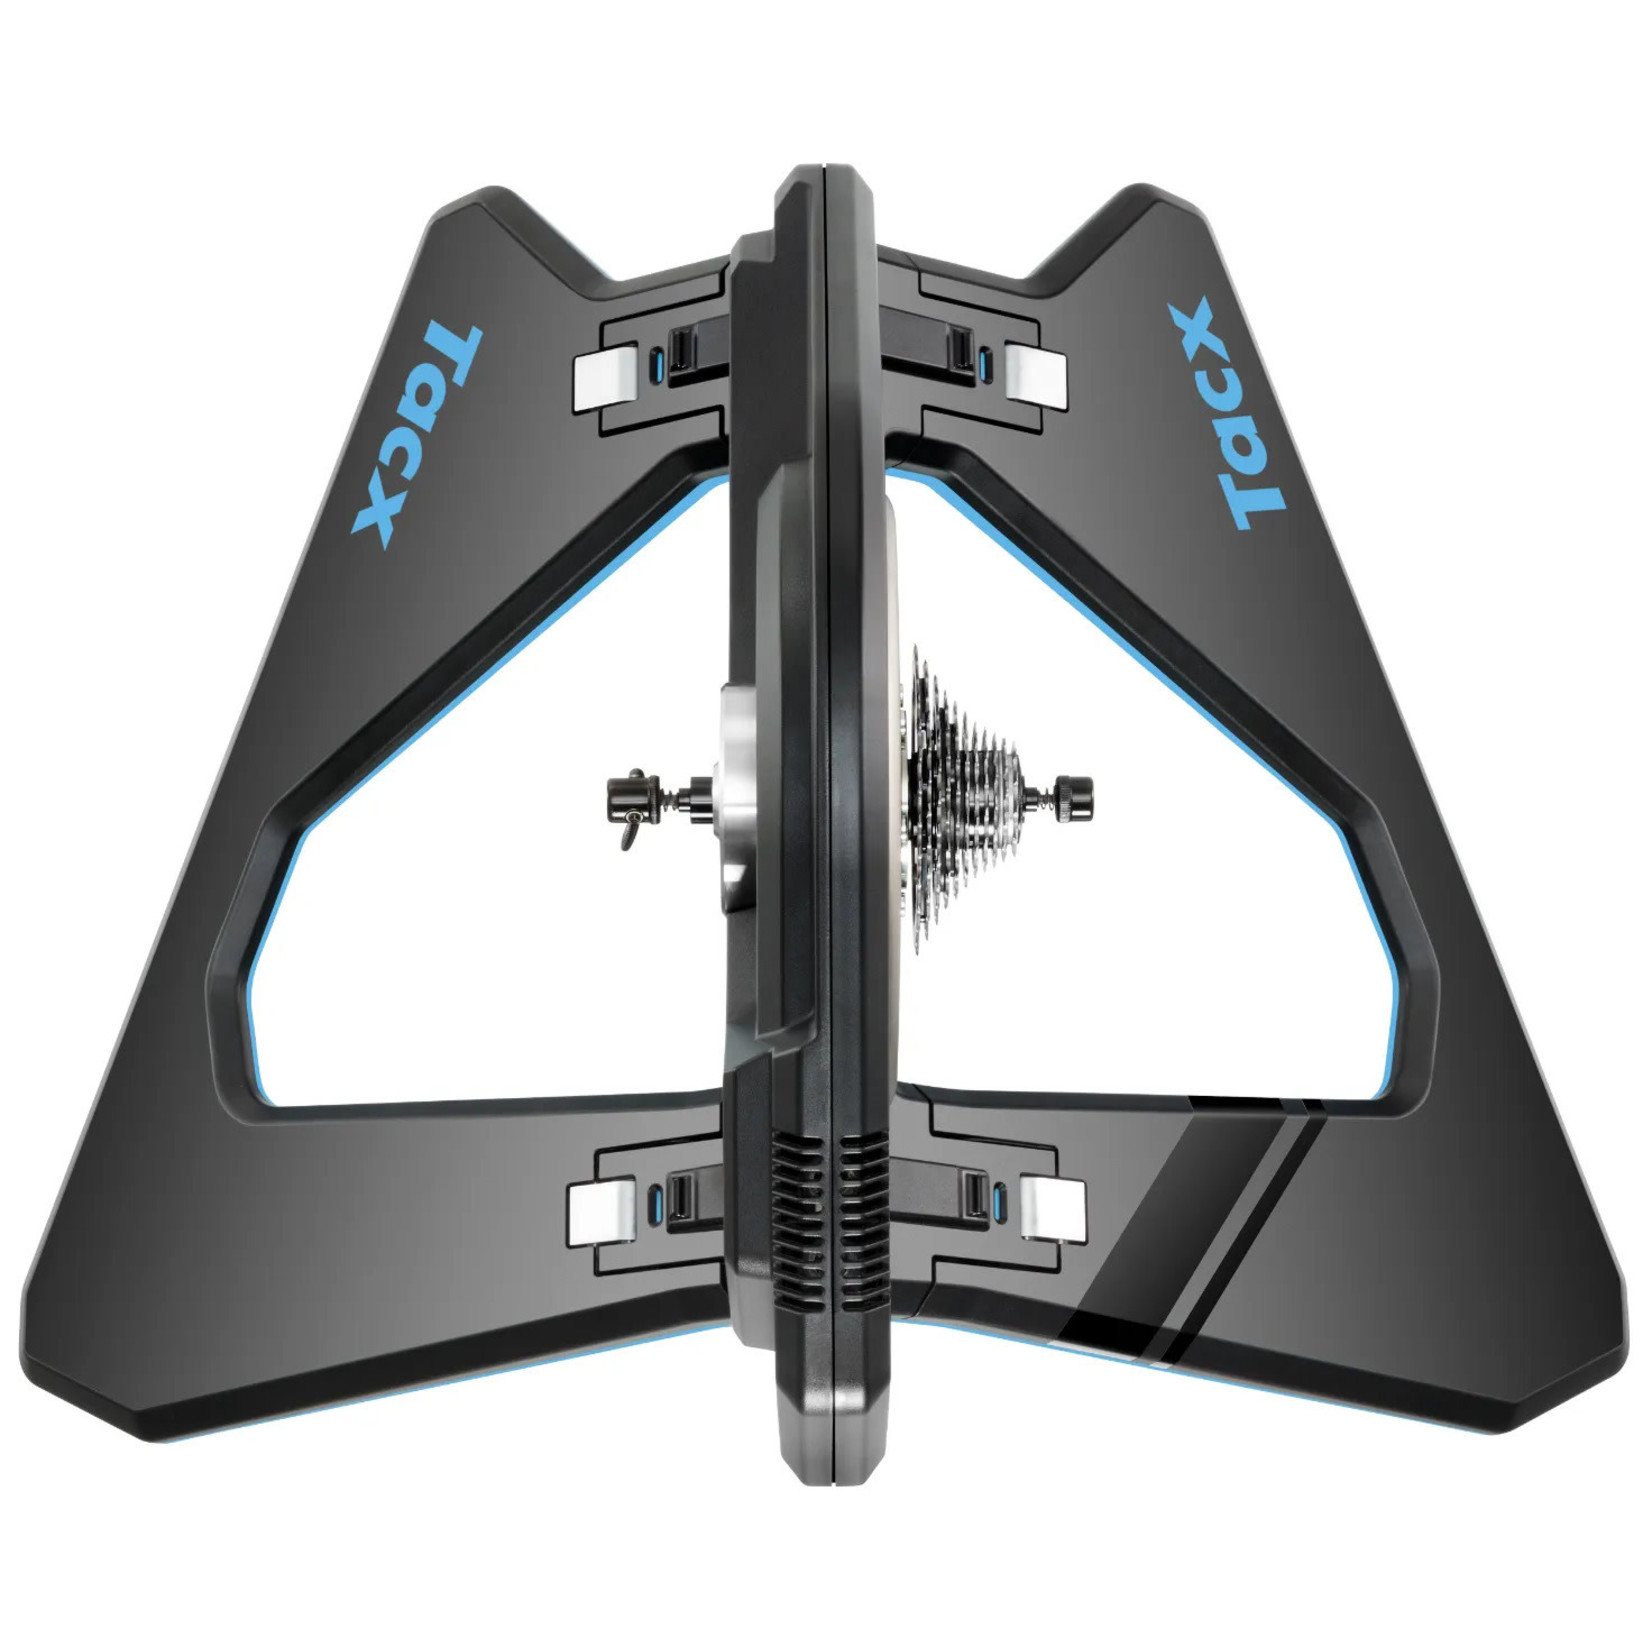 TACX Neo 2T T2875 Smart Trainer